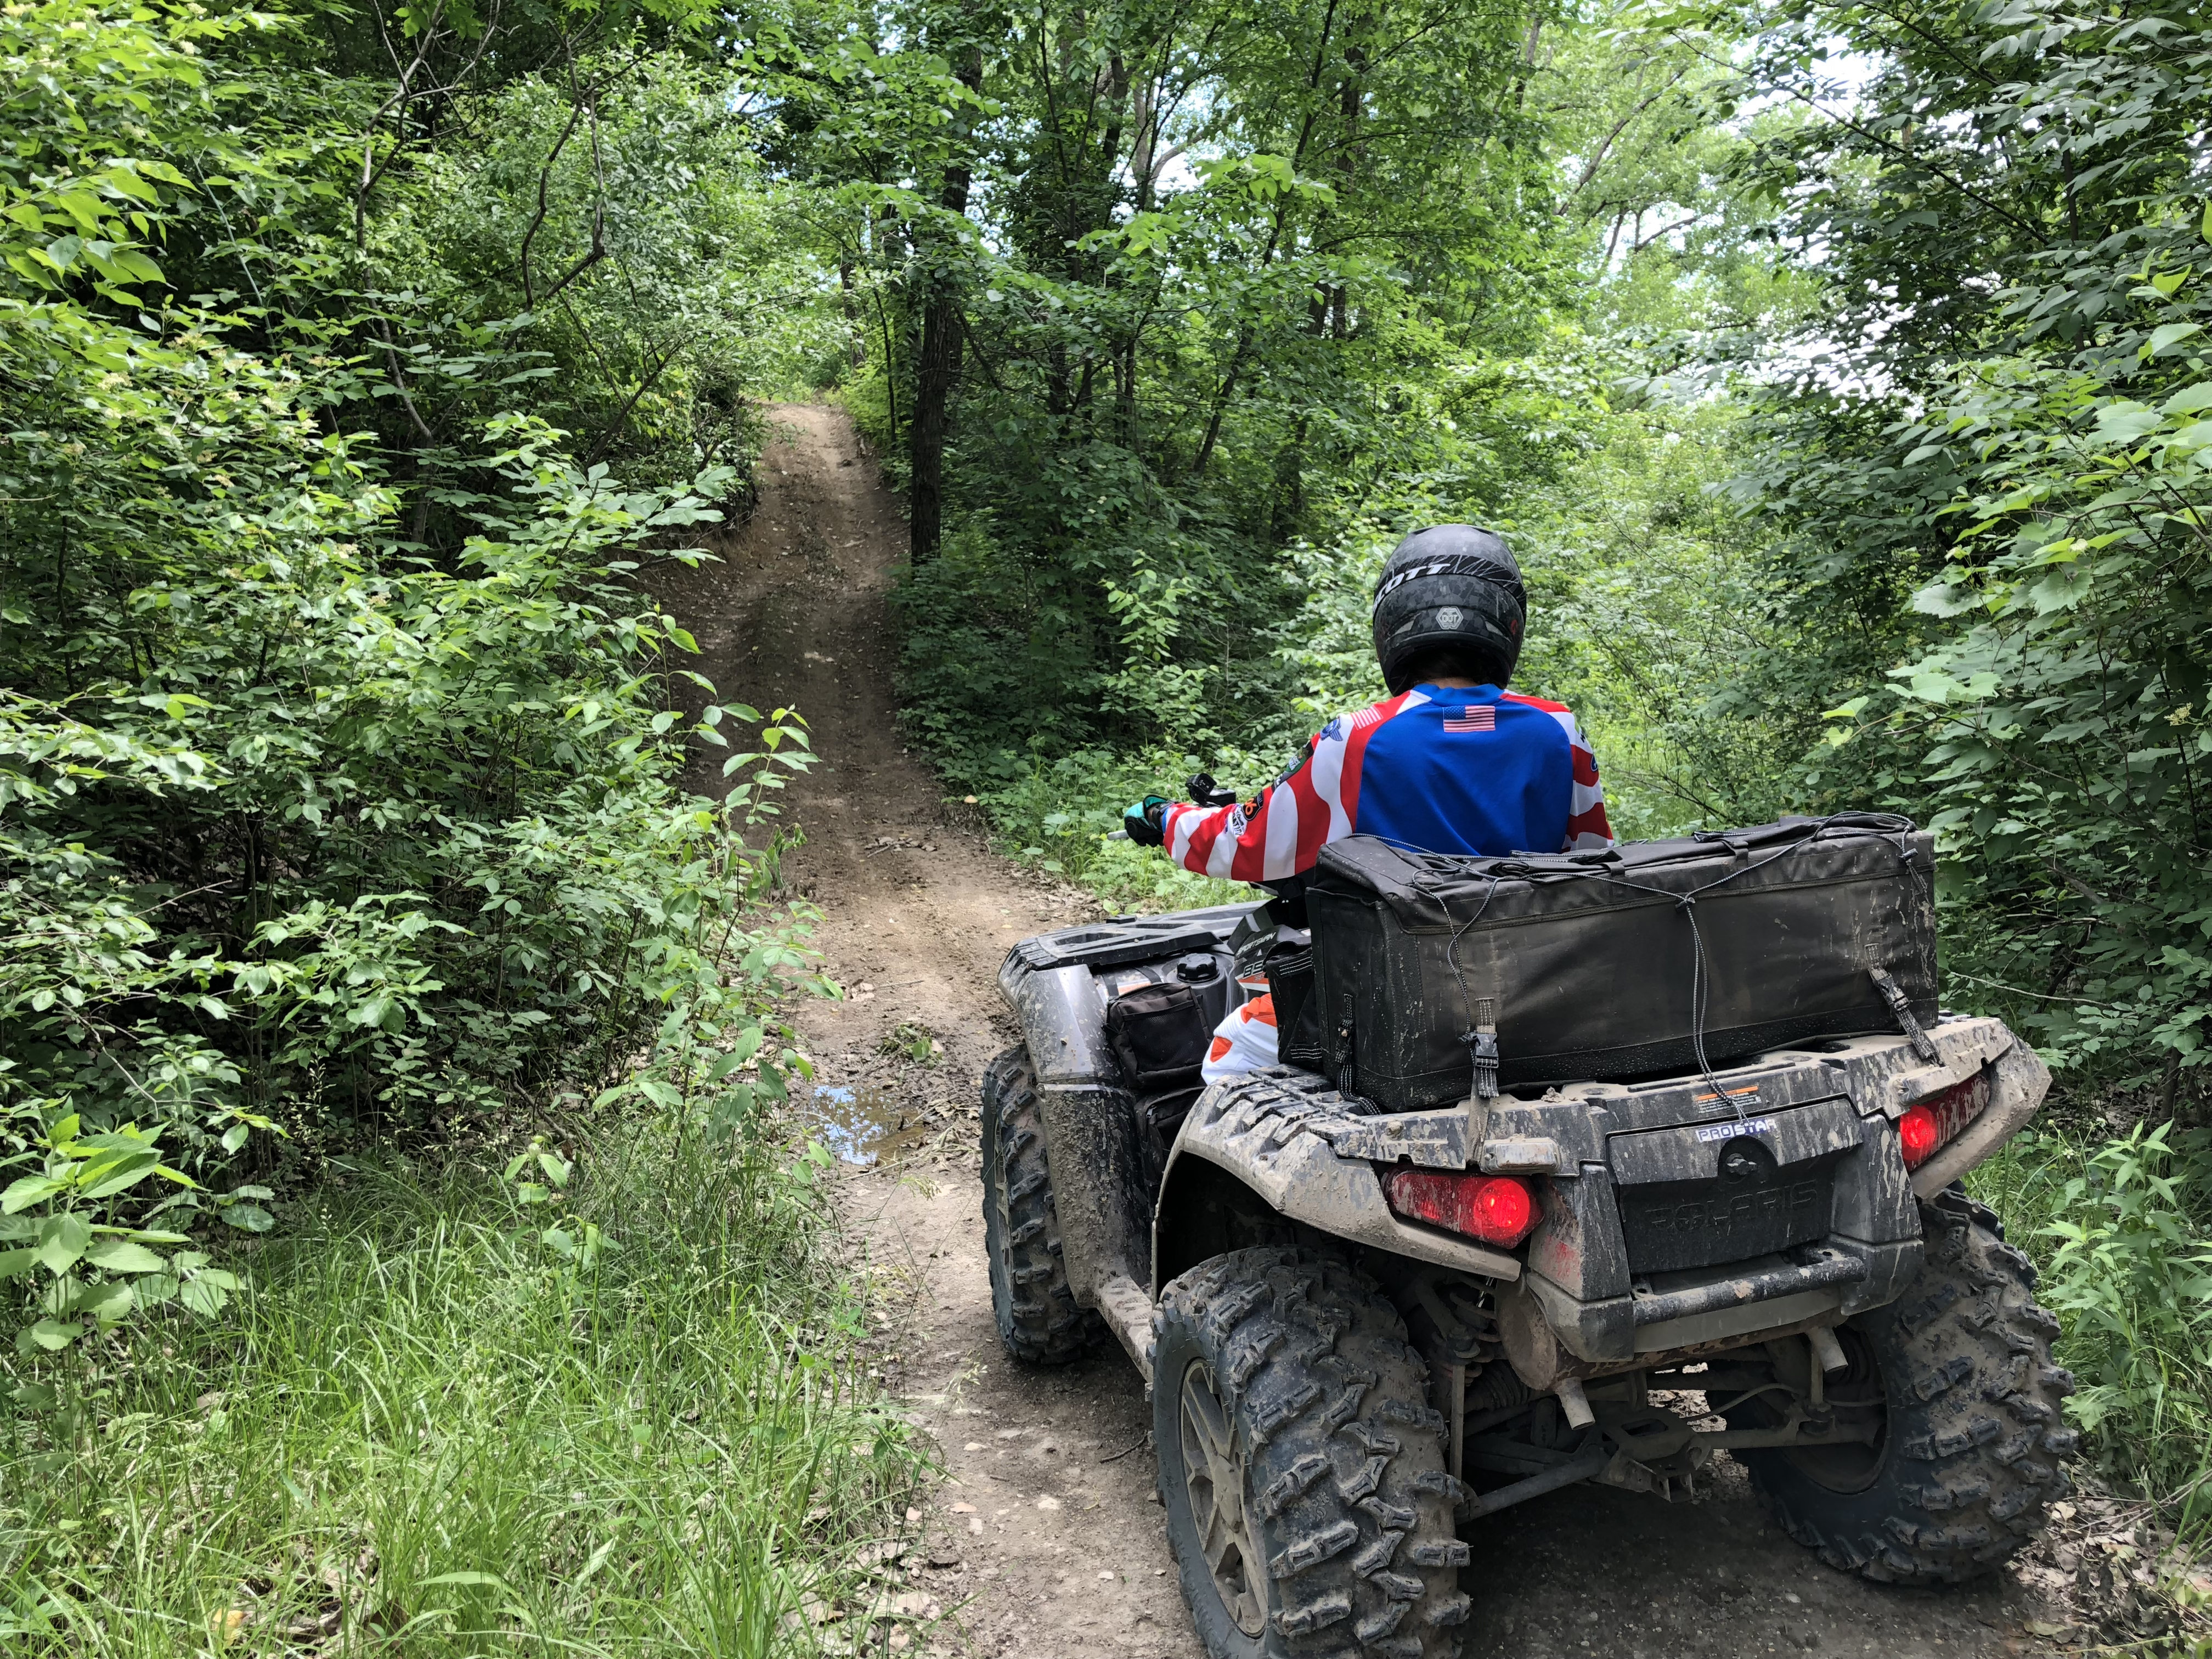 A rider on a four-wheeler traverses up a dirt hill on a forested trail. 